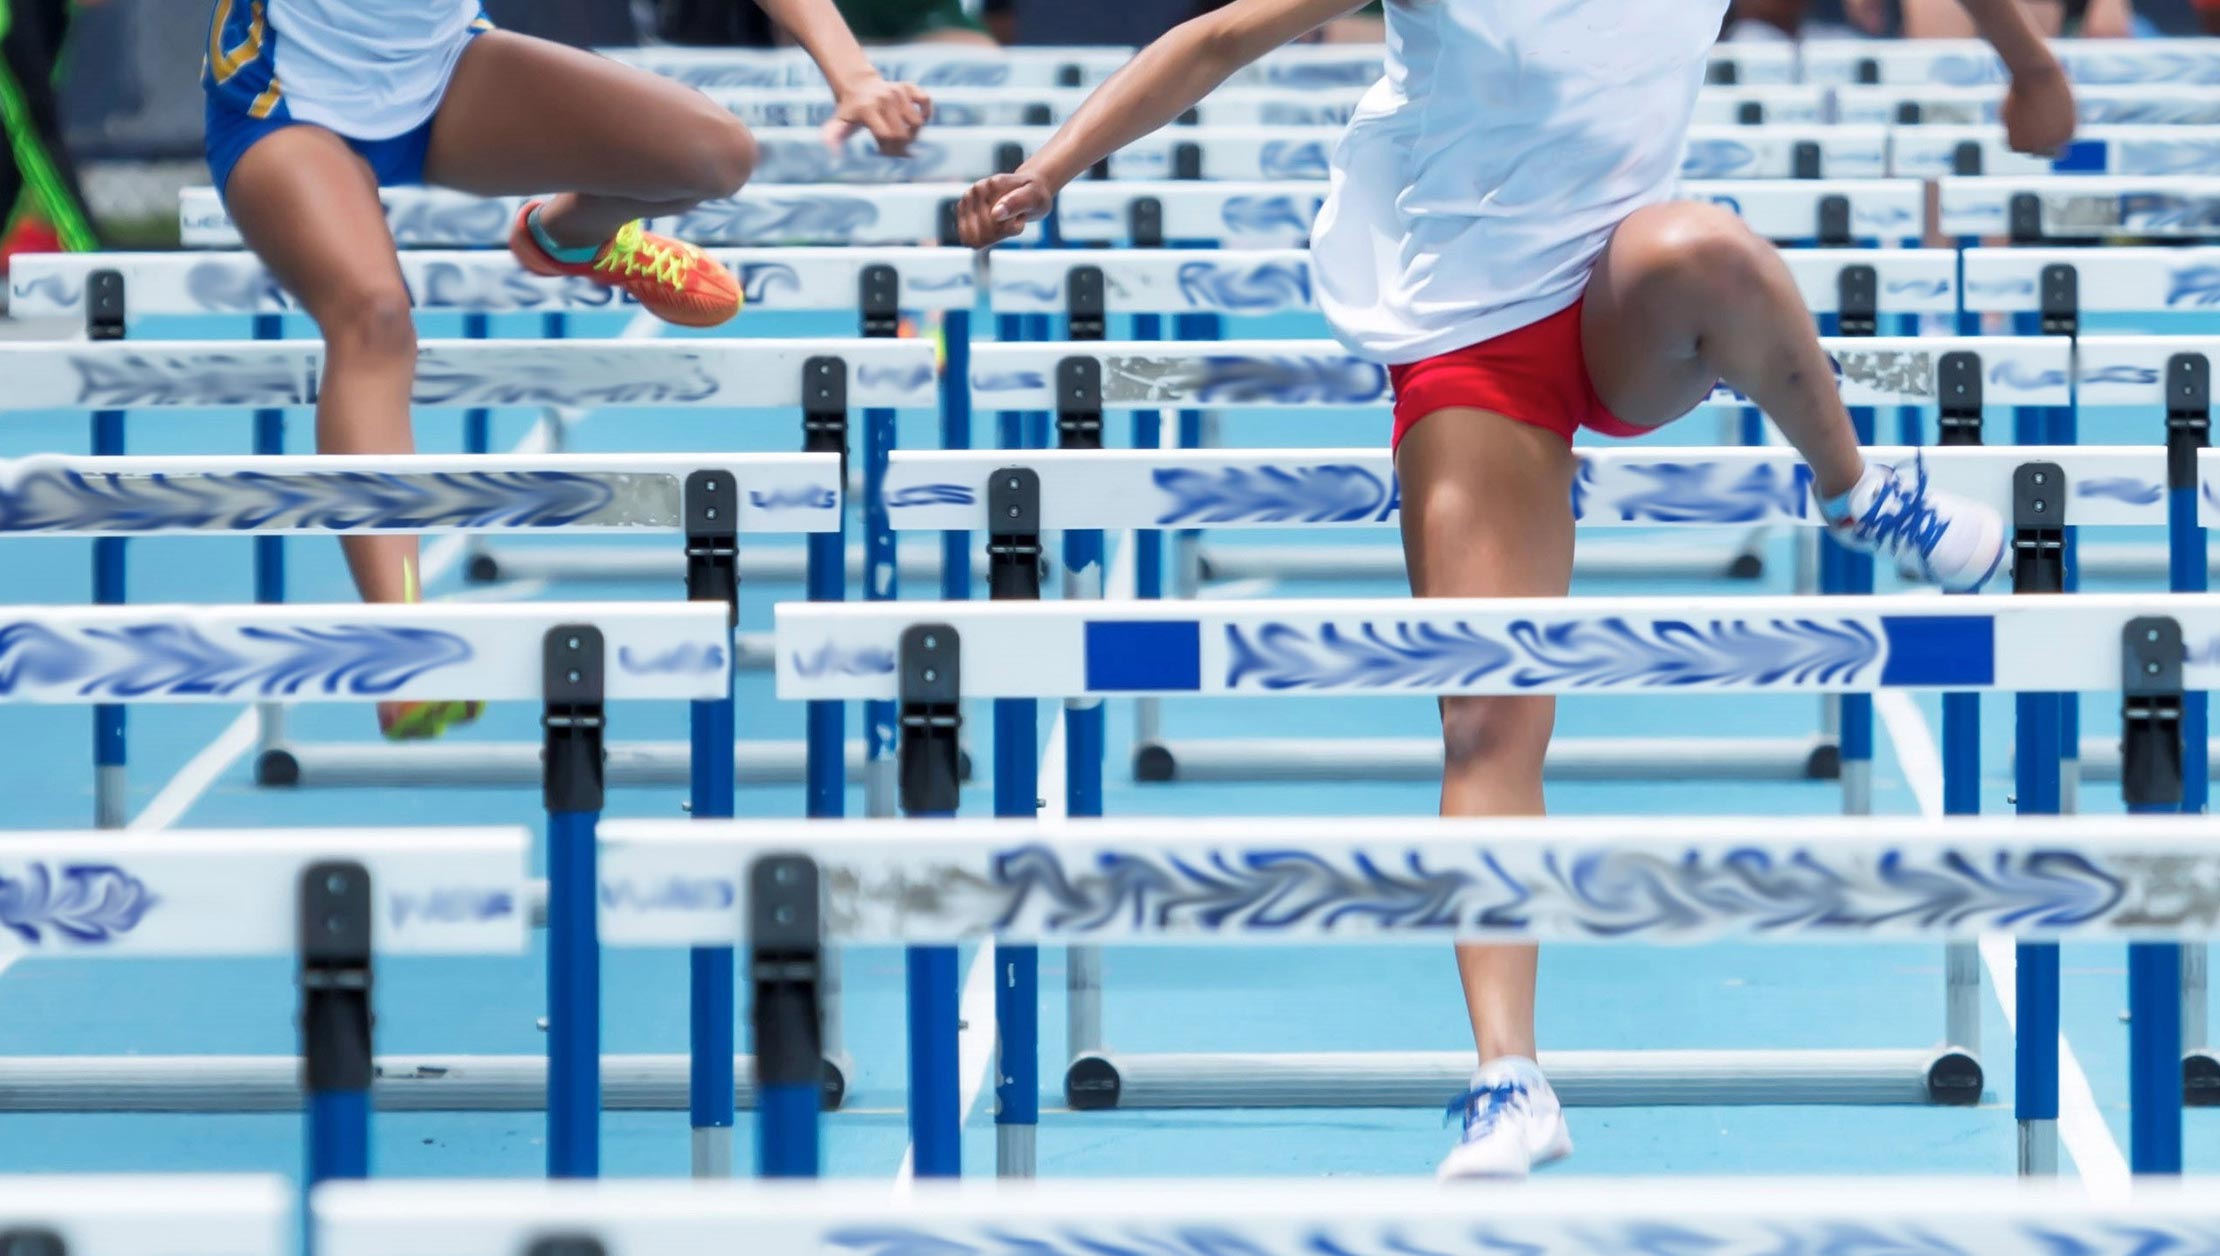 Photo of 2 people competing in hurdles track event